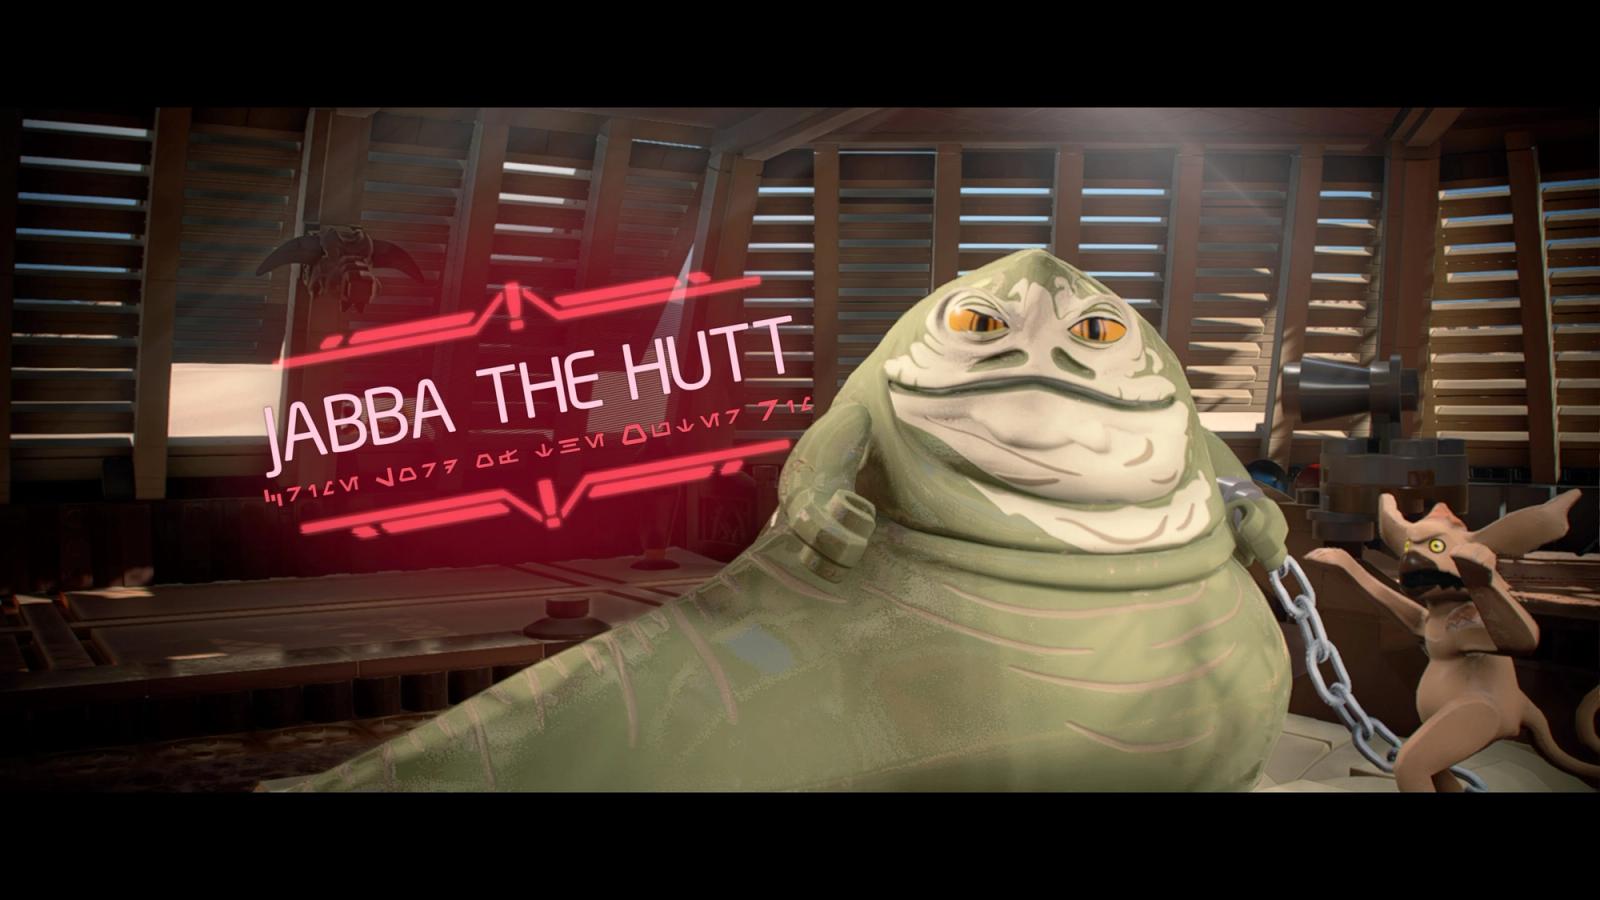 The preamble screen for the Jabba The Hutt boss fight in Lego Star Wars: The Skywalker Saga.